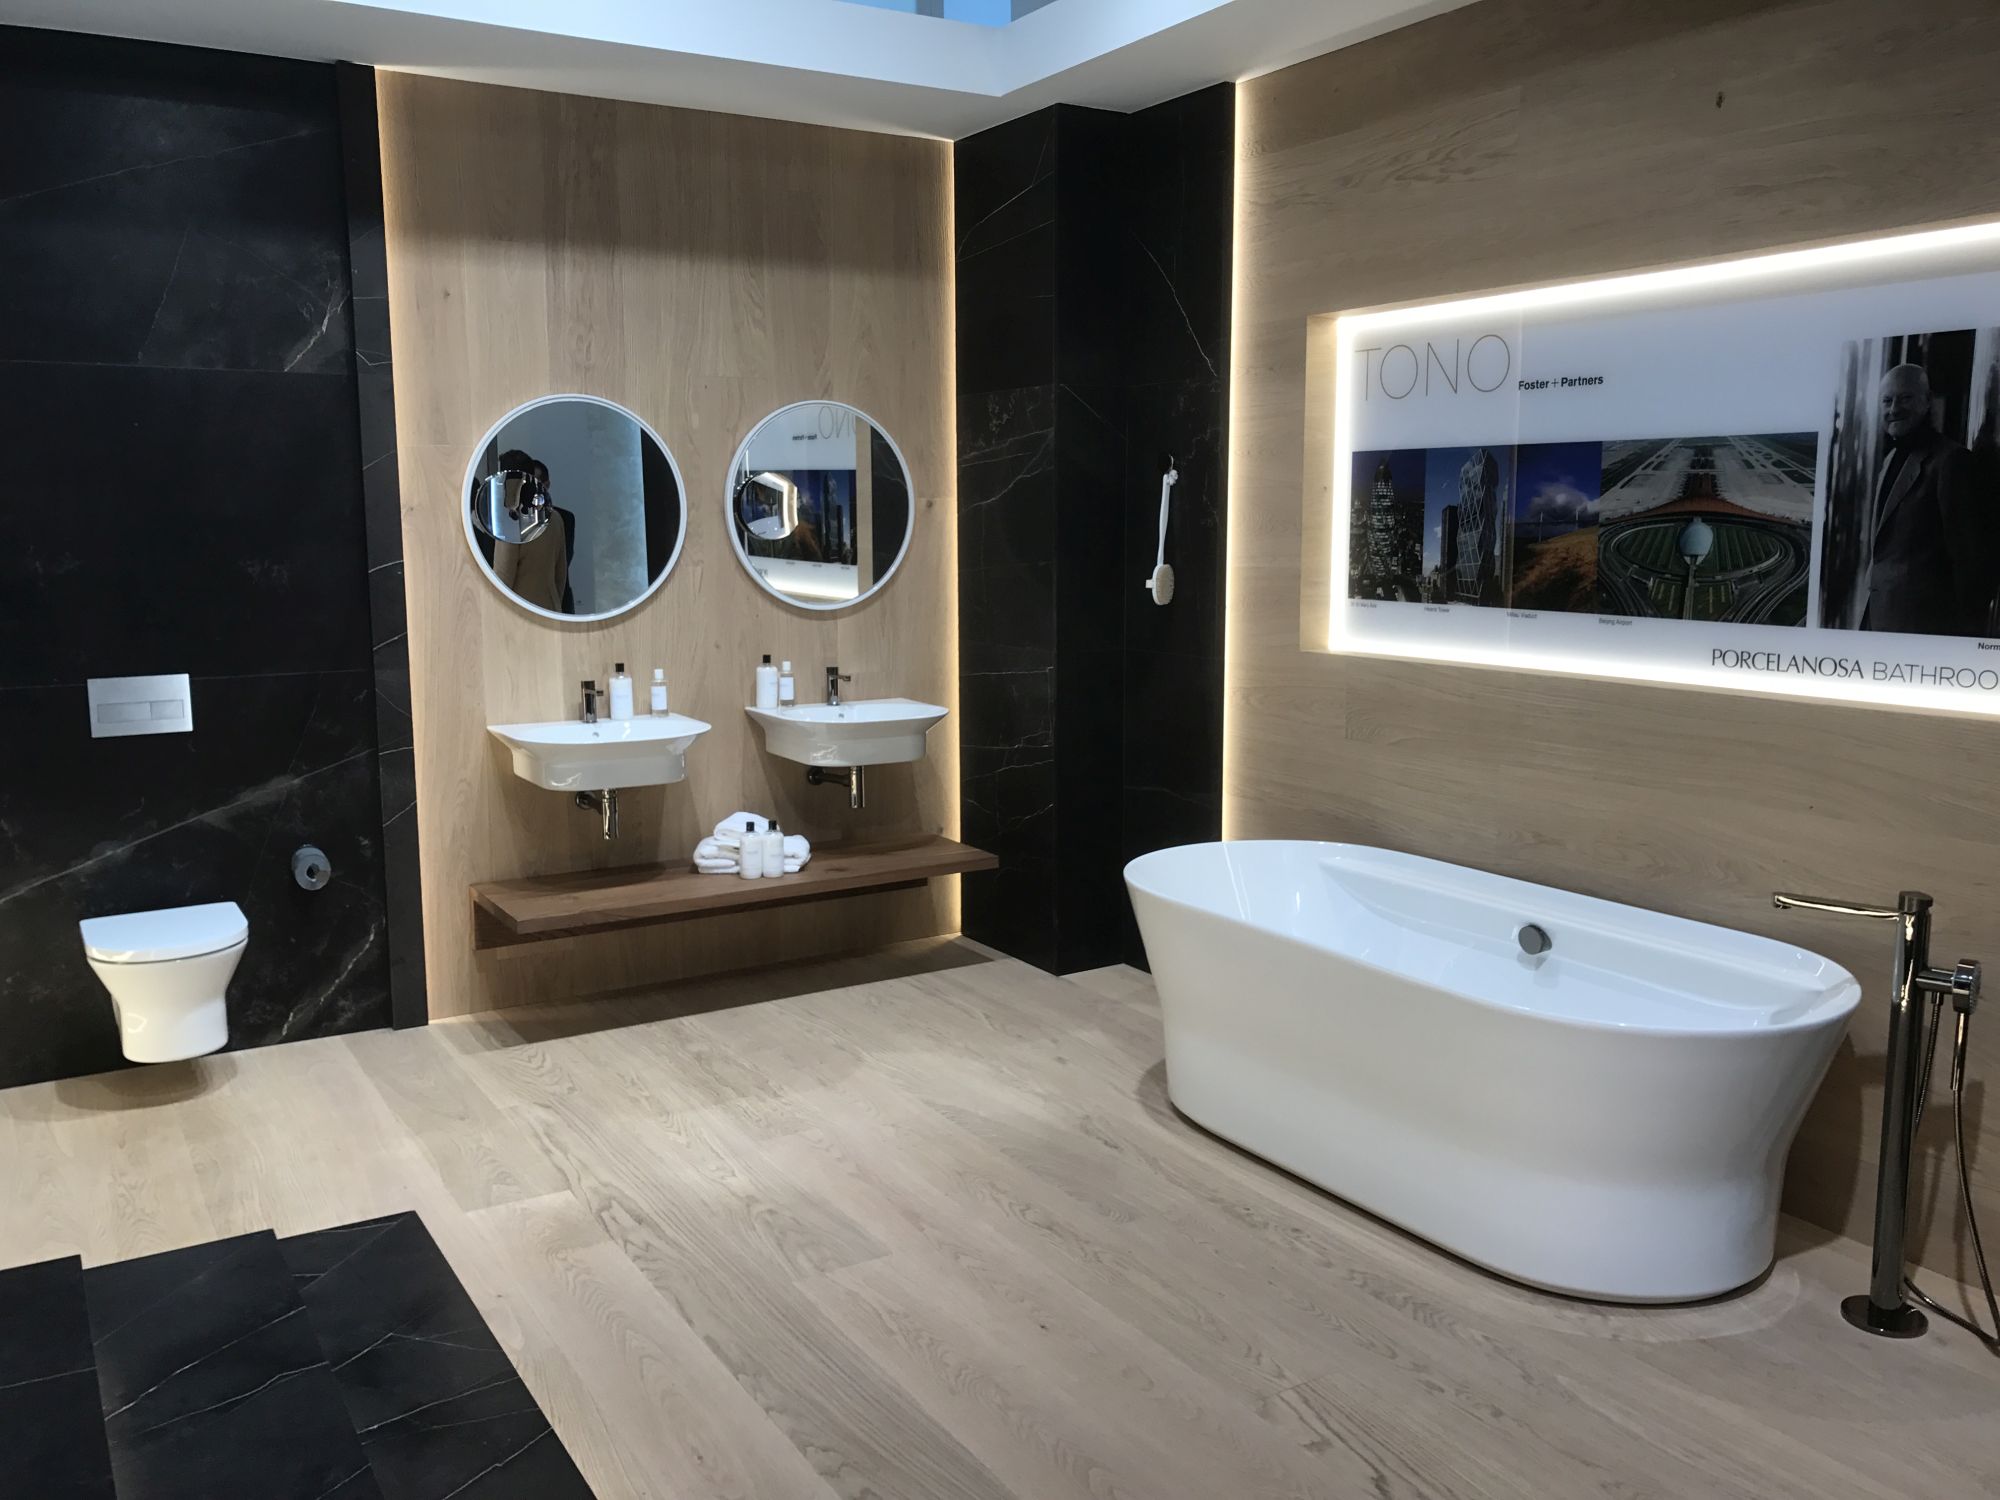 Tono bathroom collection by Foster + Partners